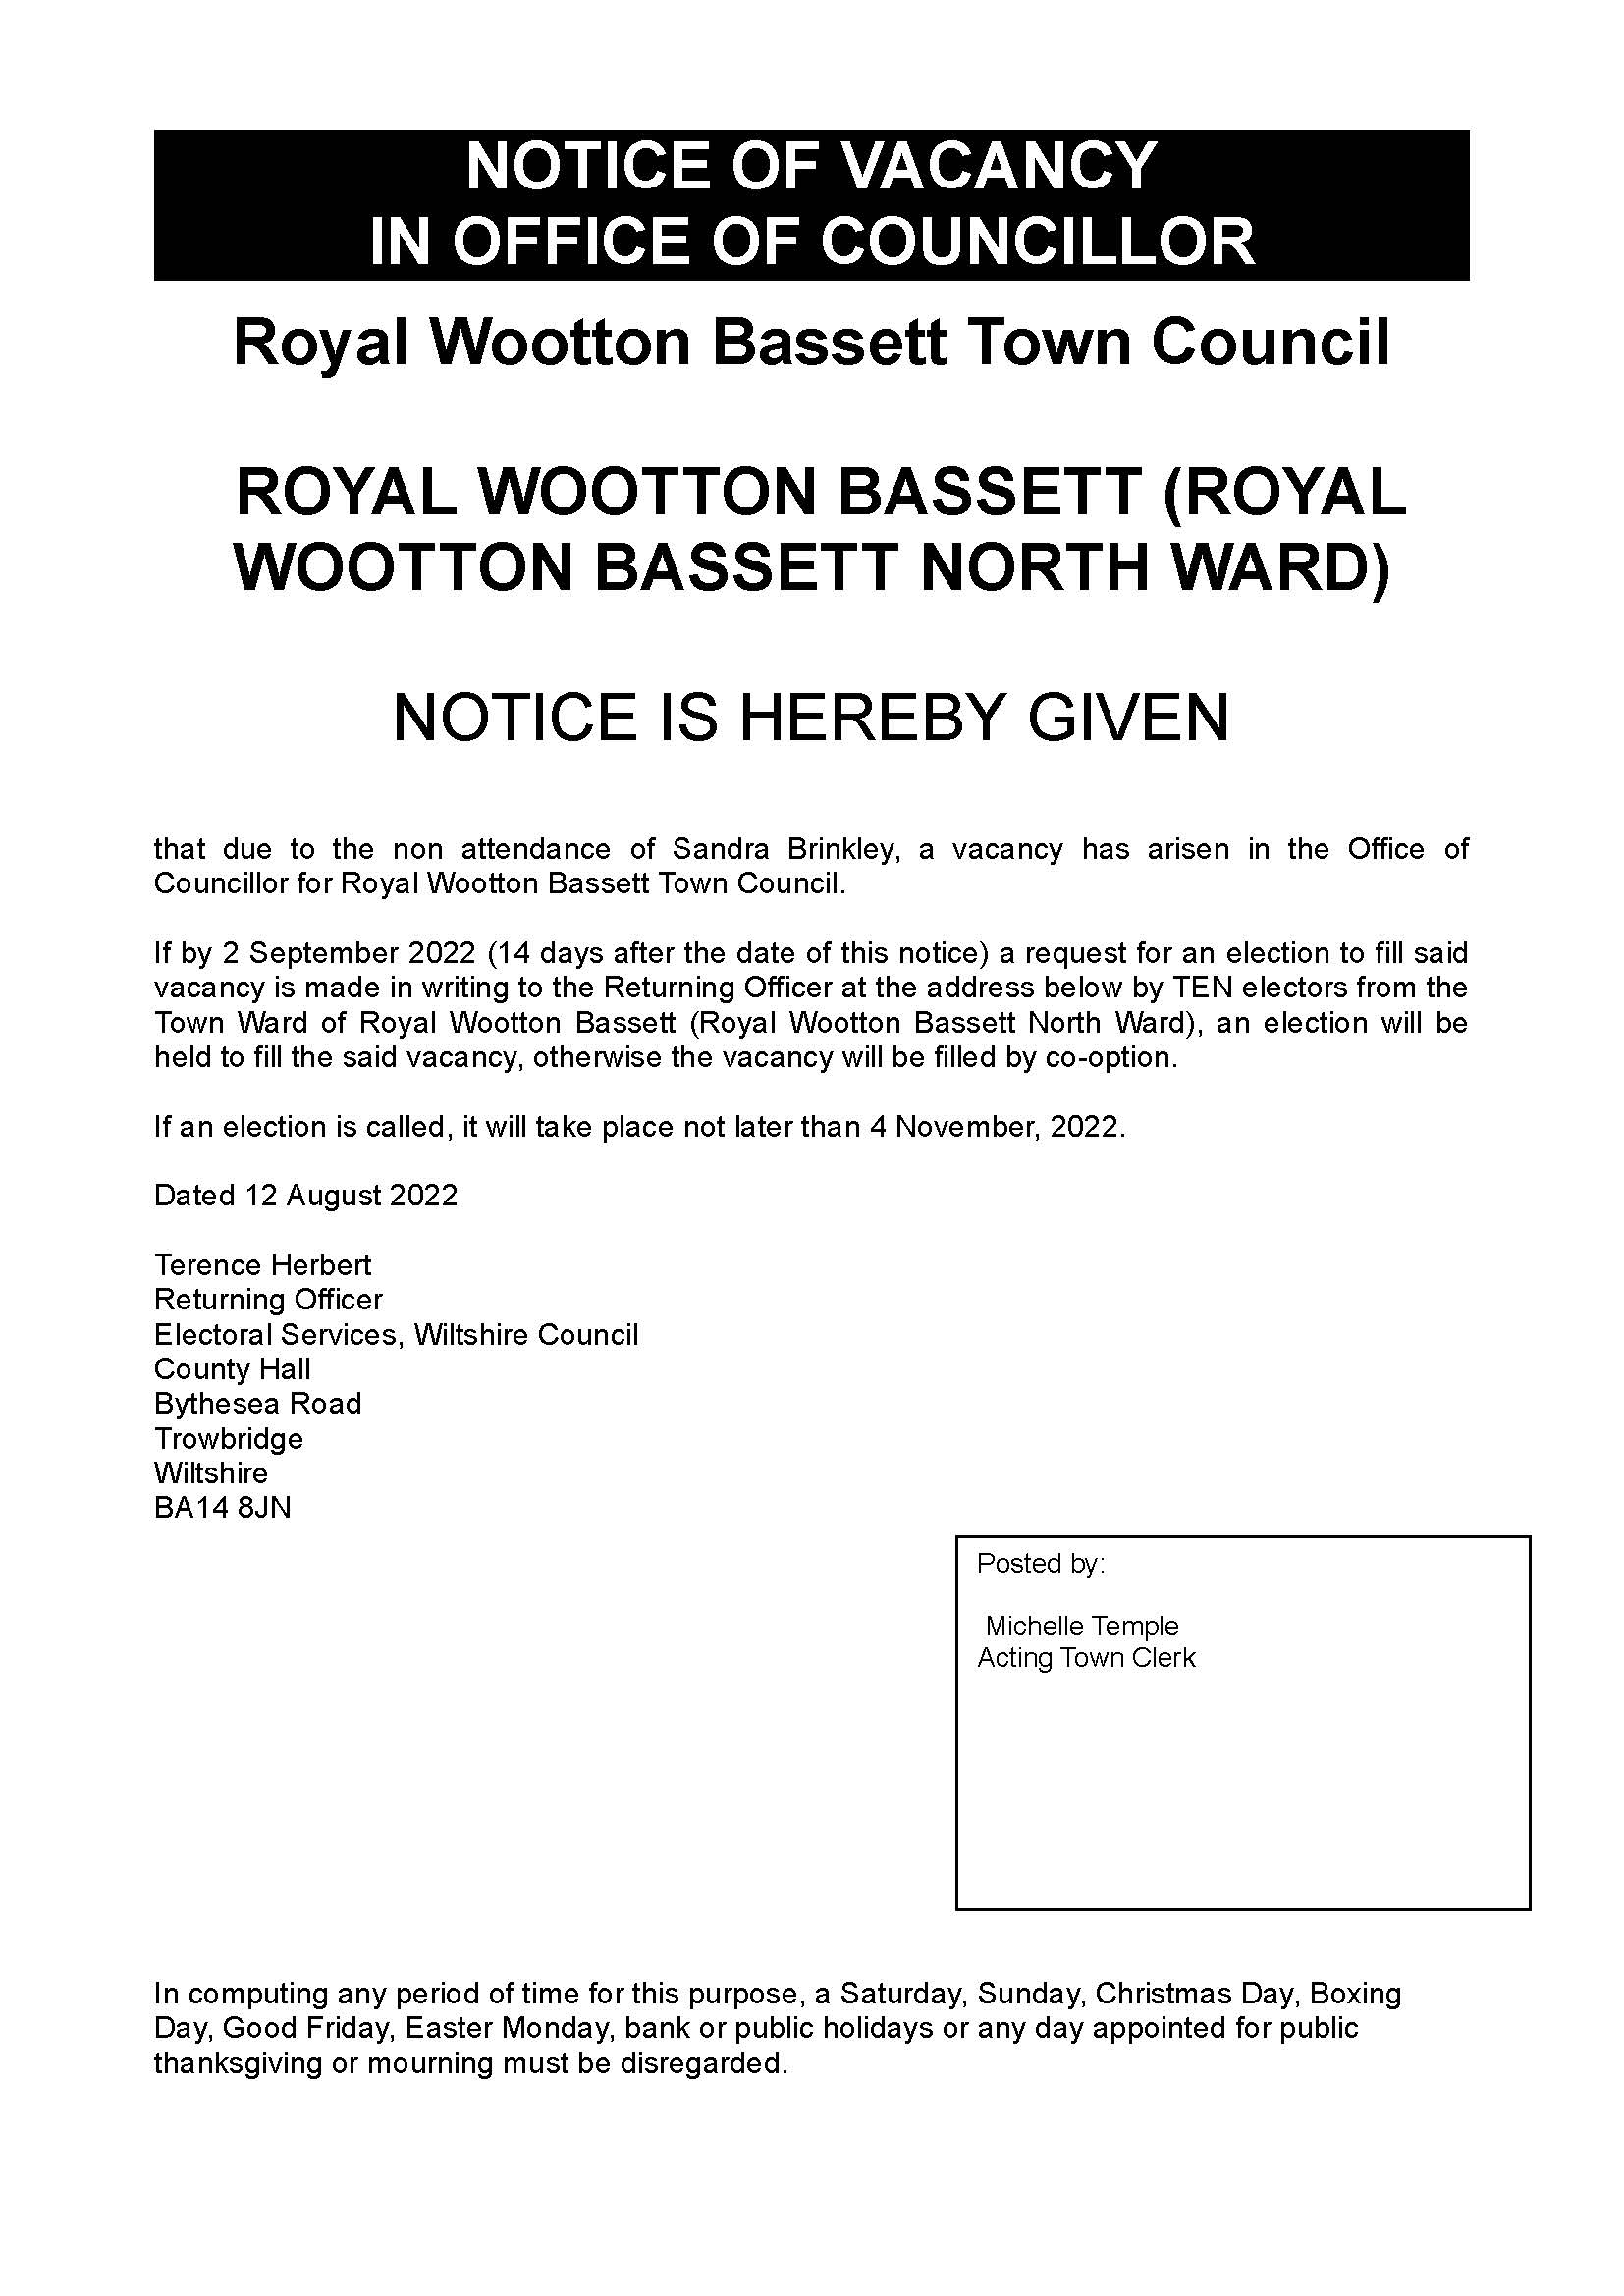 Notice of Vacancy in Office of Councillor